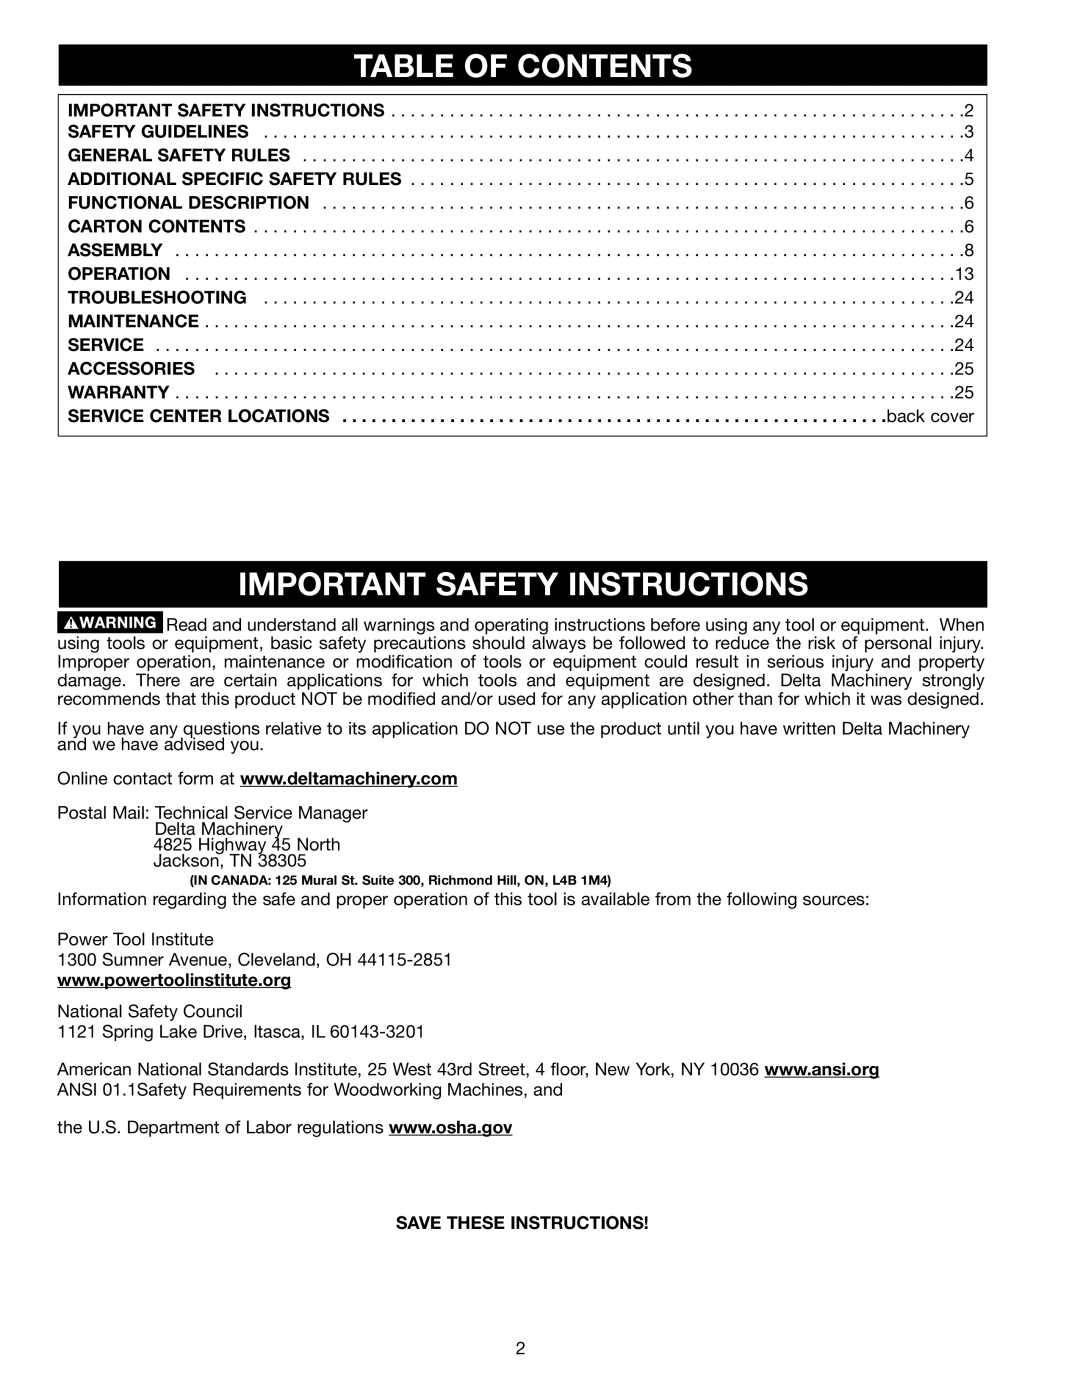 Porter-Cable 33-422, 33-400, 33-423) Table Of Contents, Important Safety Instructions, back cover, Save These Instructions 